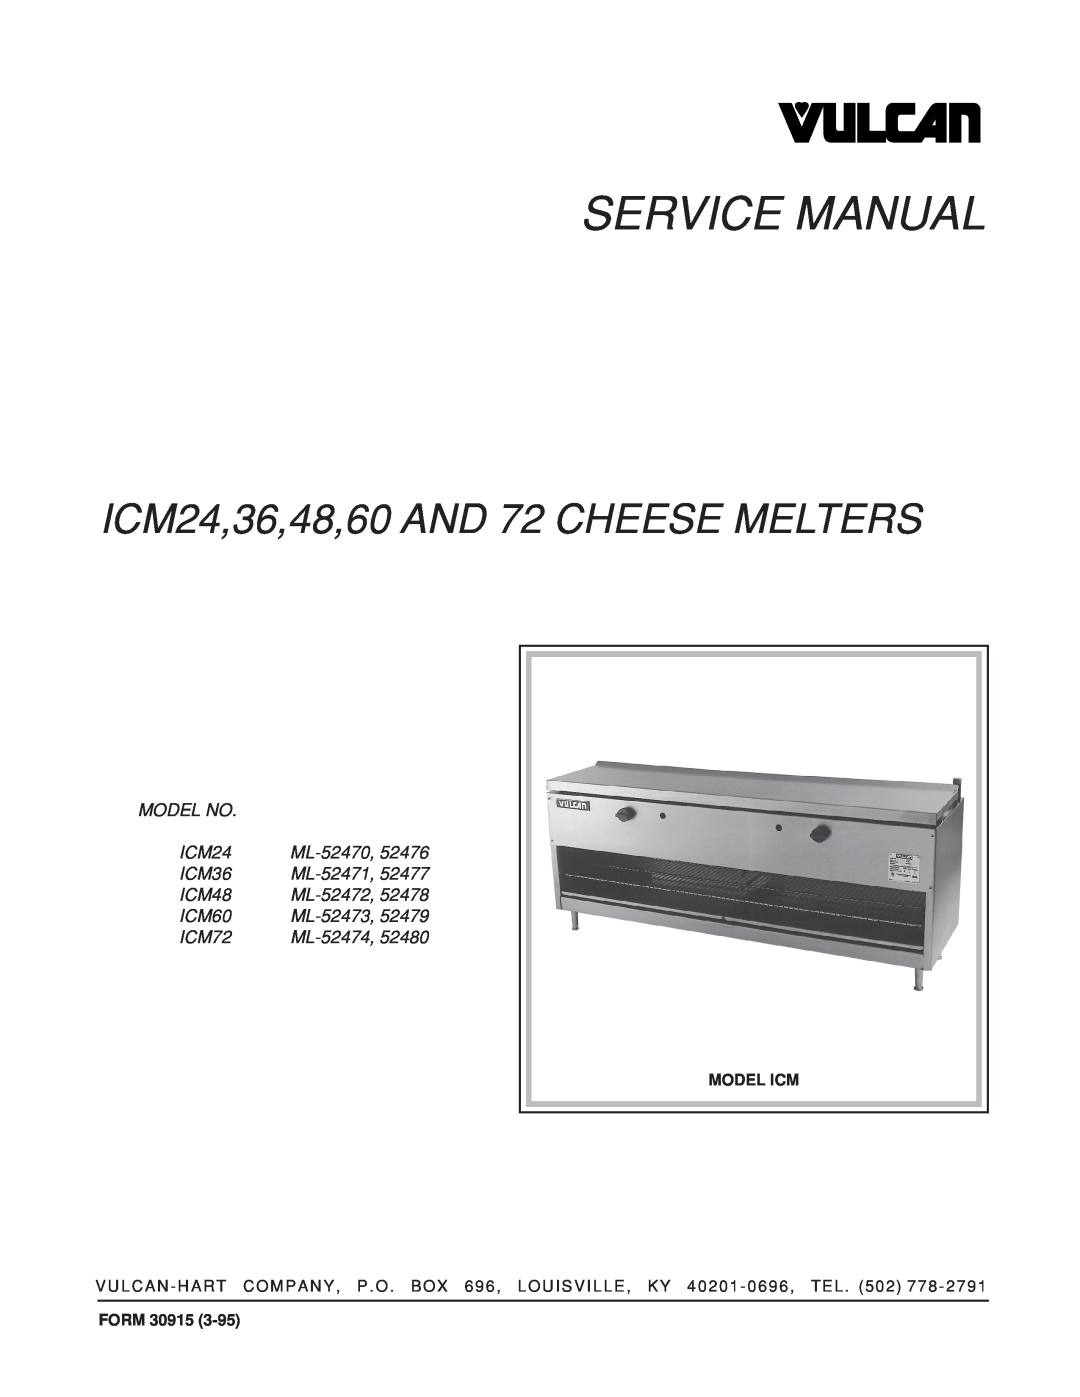 Vulcan-Hart ICM36, ICM60, ICM48, ICM72 service manual ICM24,36,48,60 AND 72 CHEESE MELTERS 